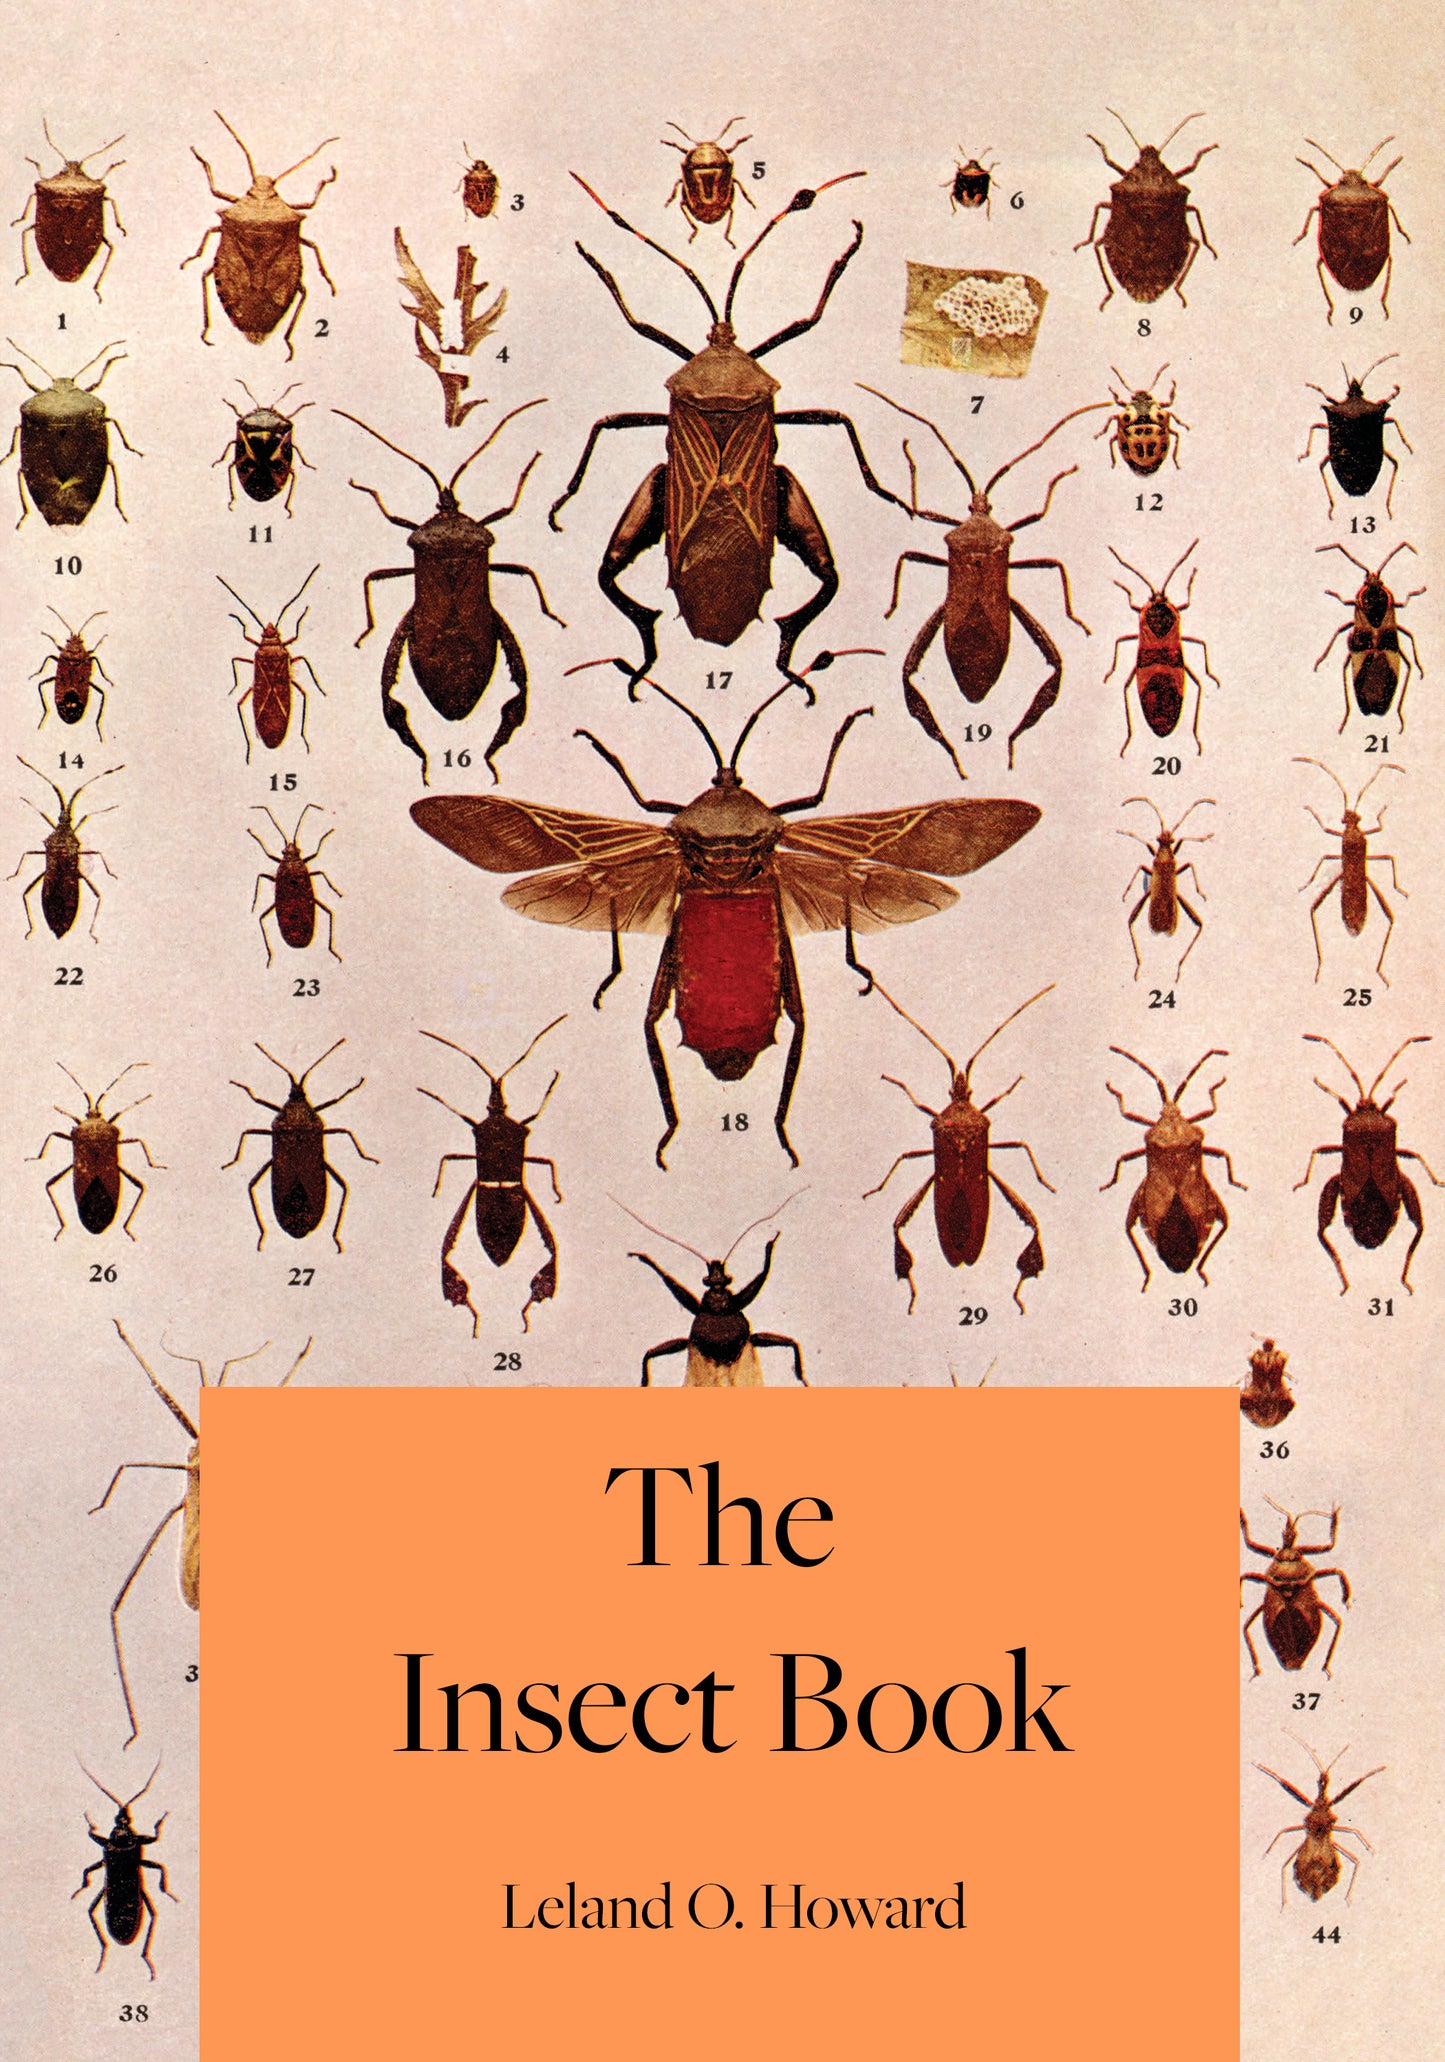 The Insect Book